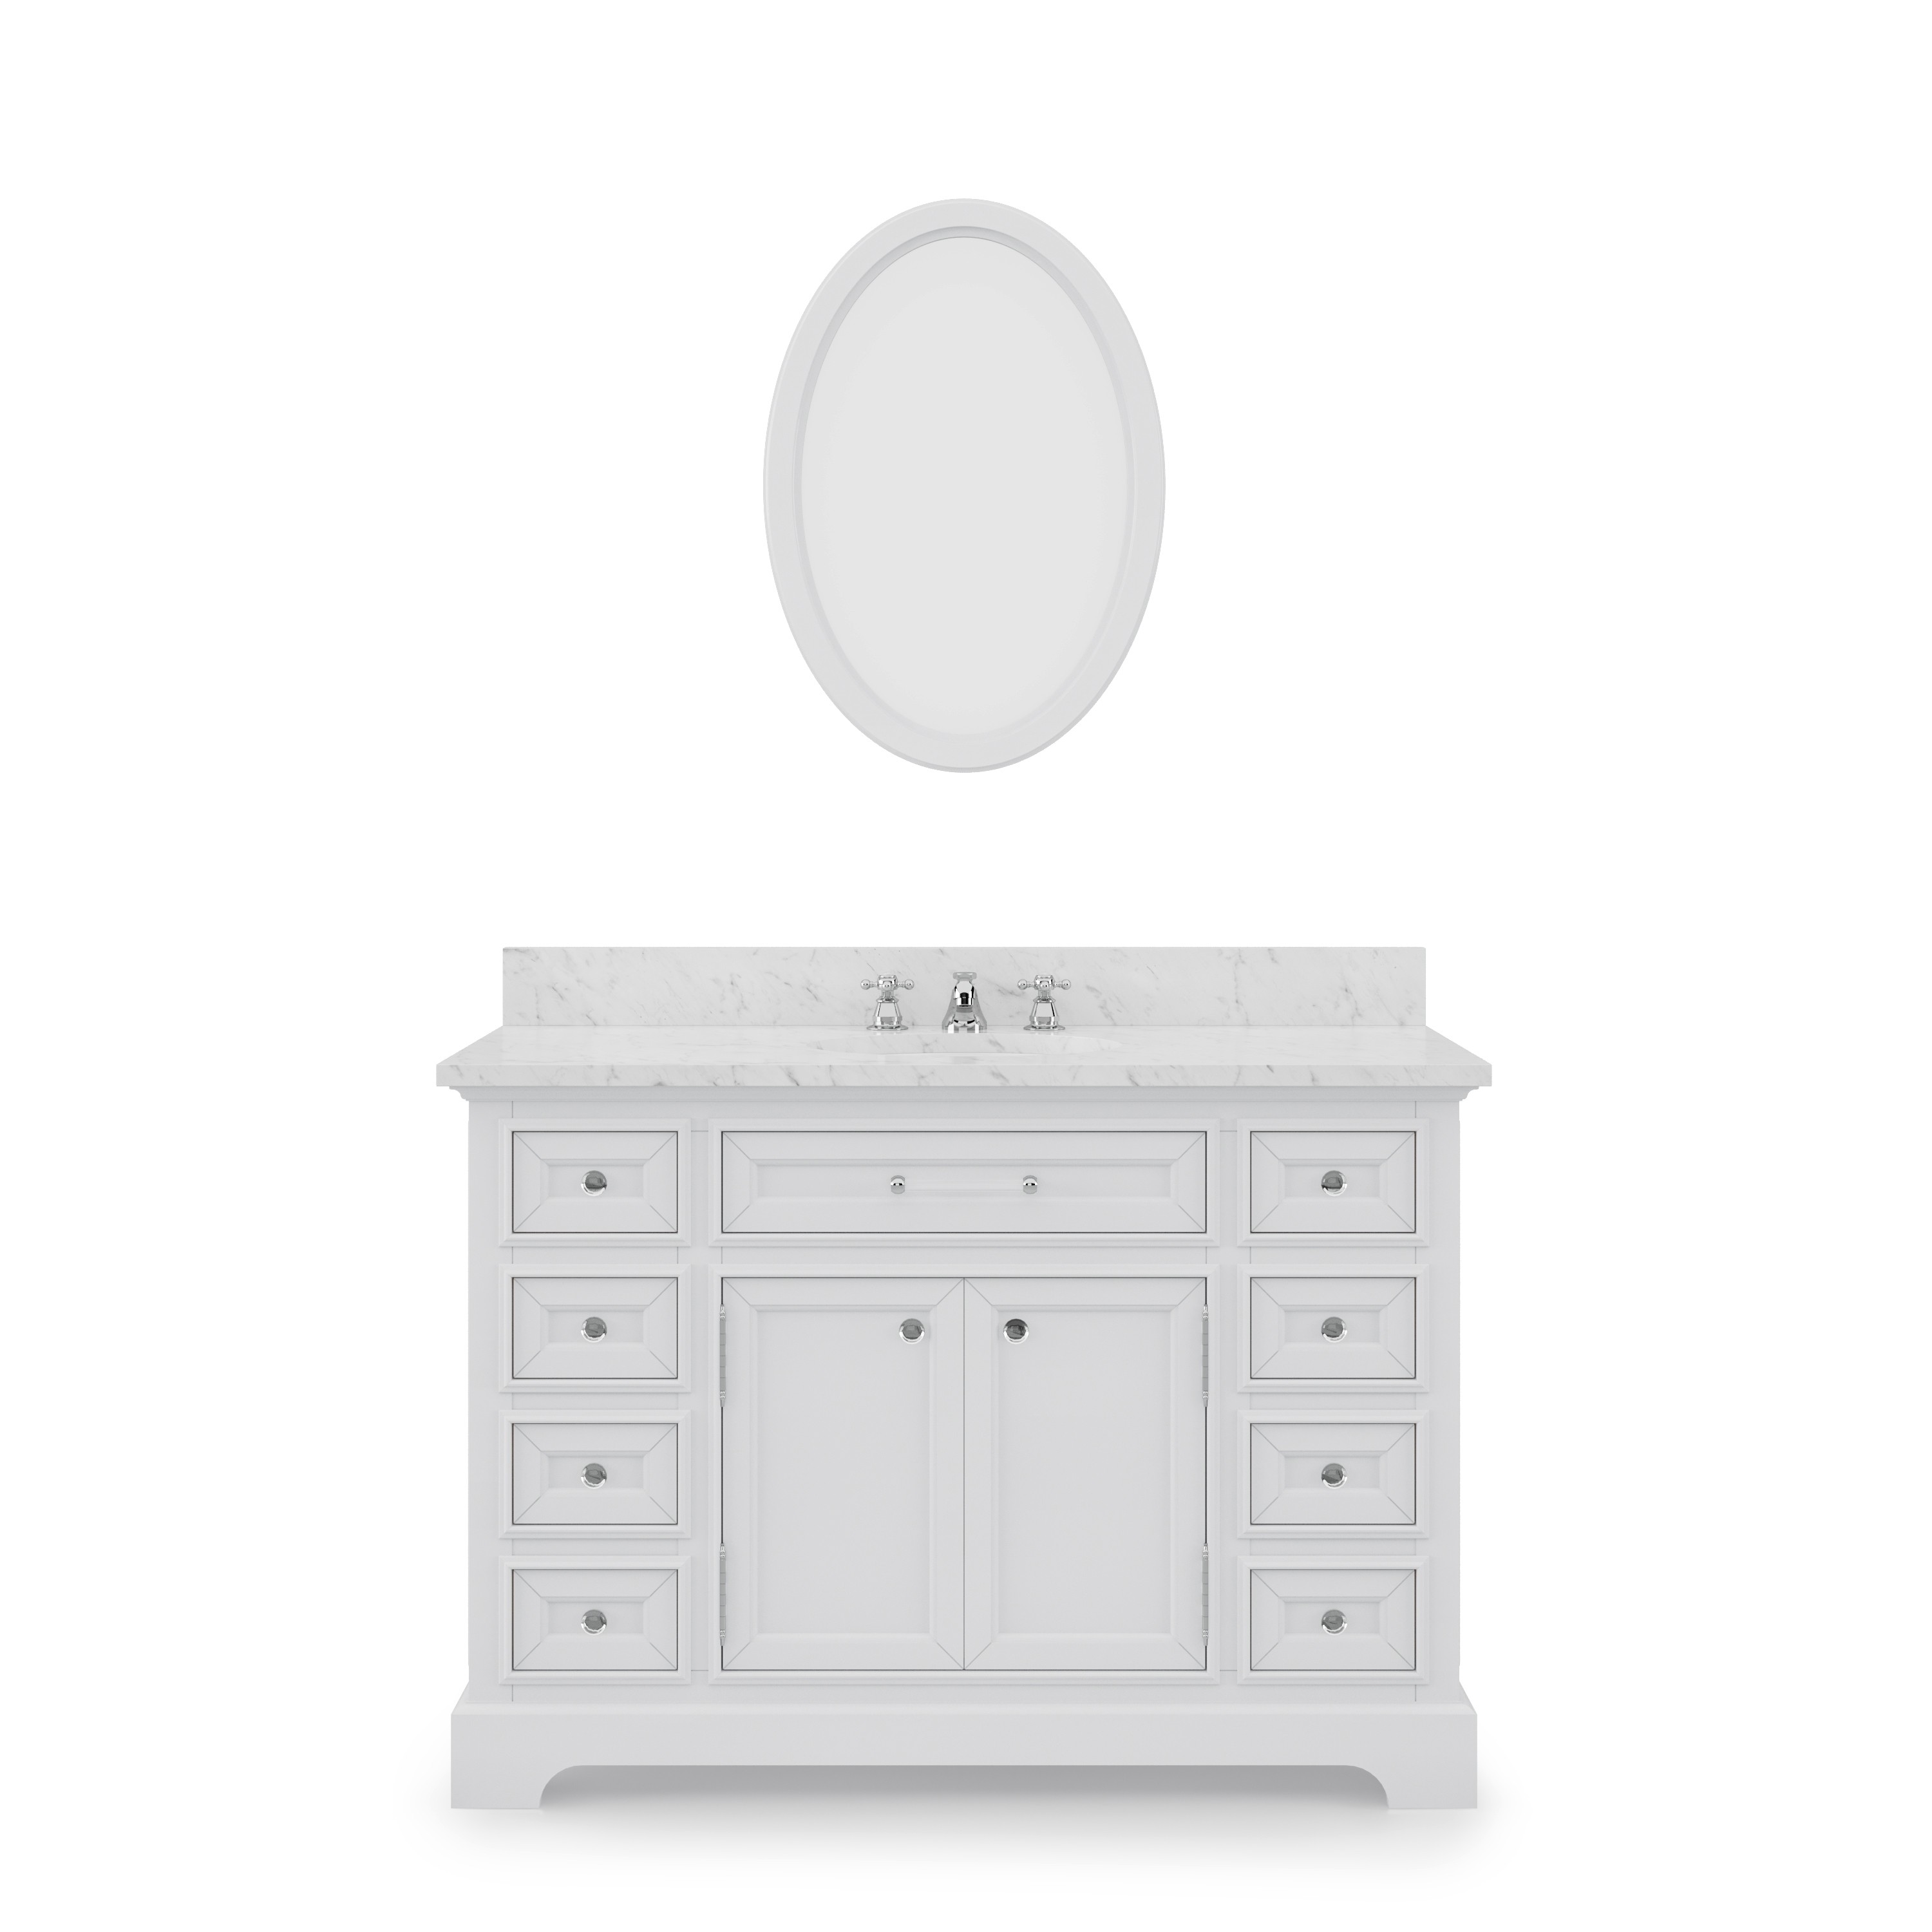 WATER-CREATION DE48CW01PW-O24BX0901 DERBY 48 INCH PURE WHITE SINGLE SINK BATHROOM VANITY WITH MATCHING FRAMED MIRROR AND FAUCET